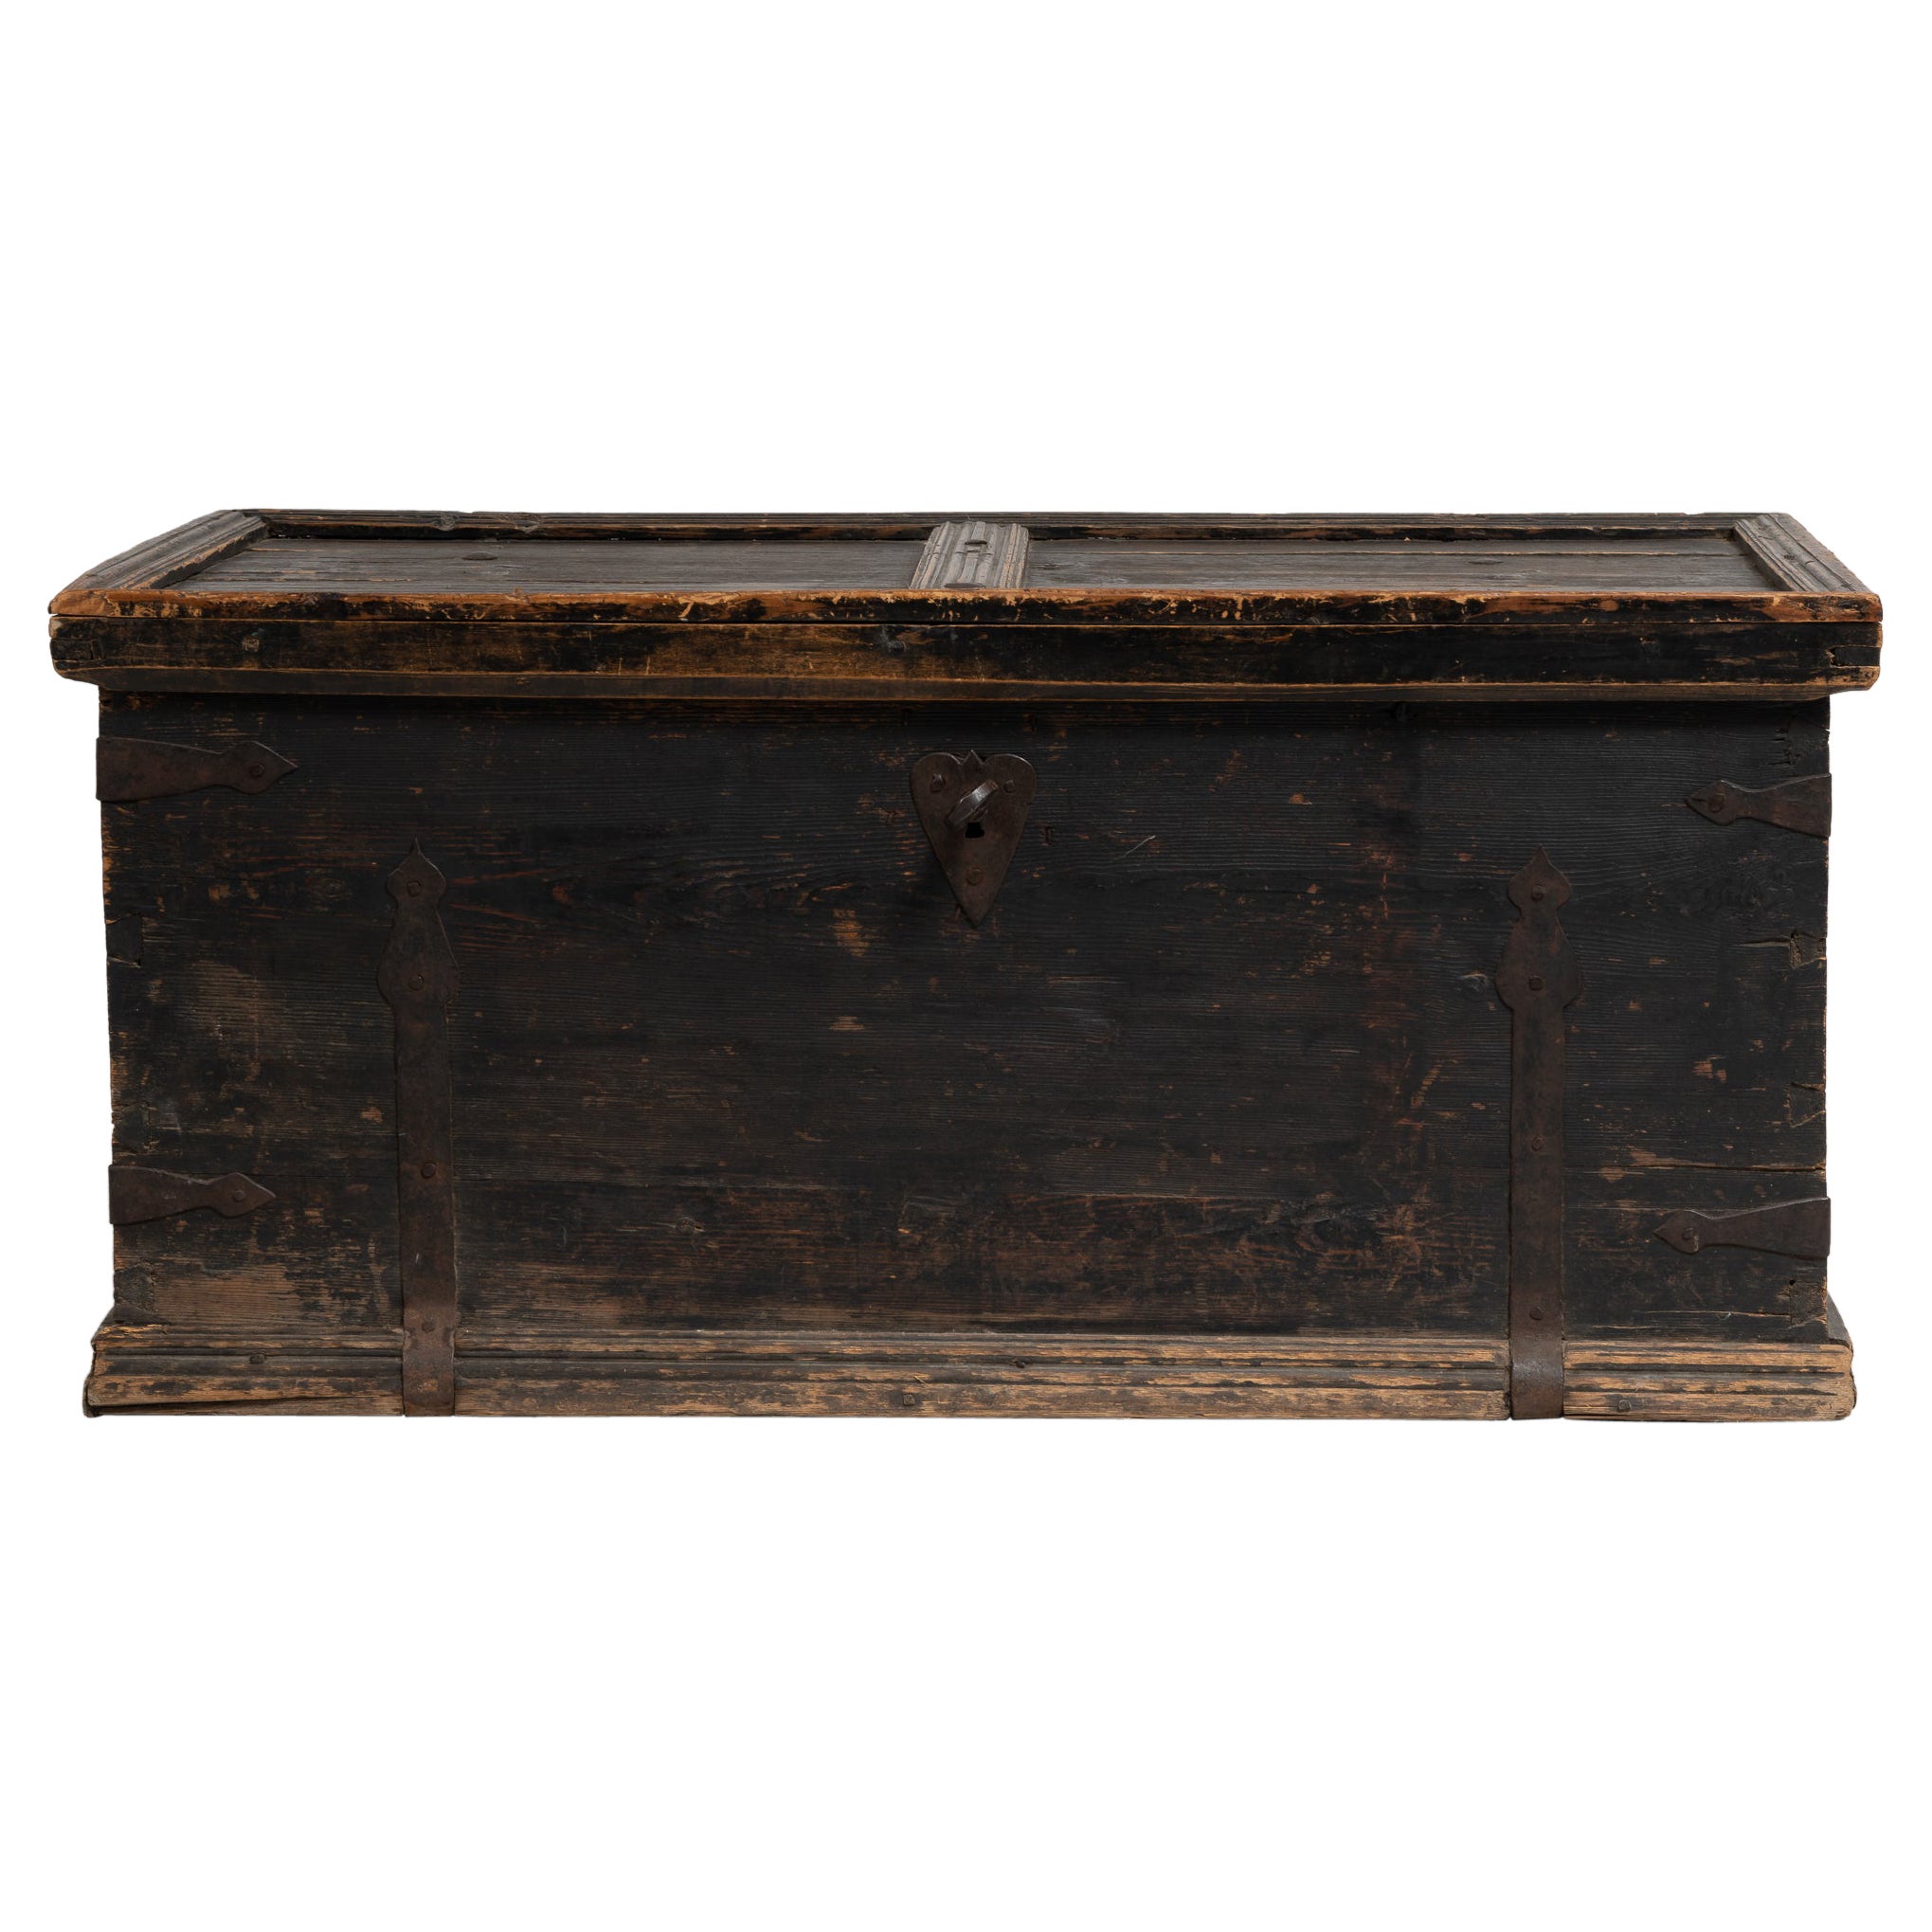 Early 19th Century Swedish Black Pine Soldier's Chest